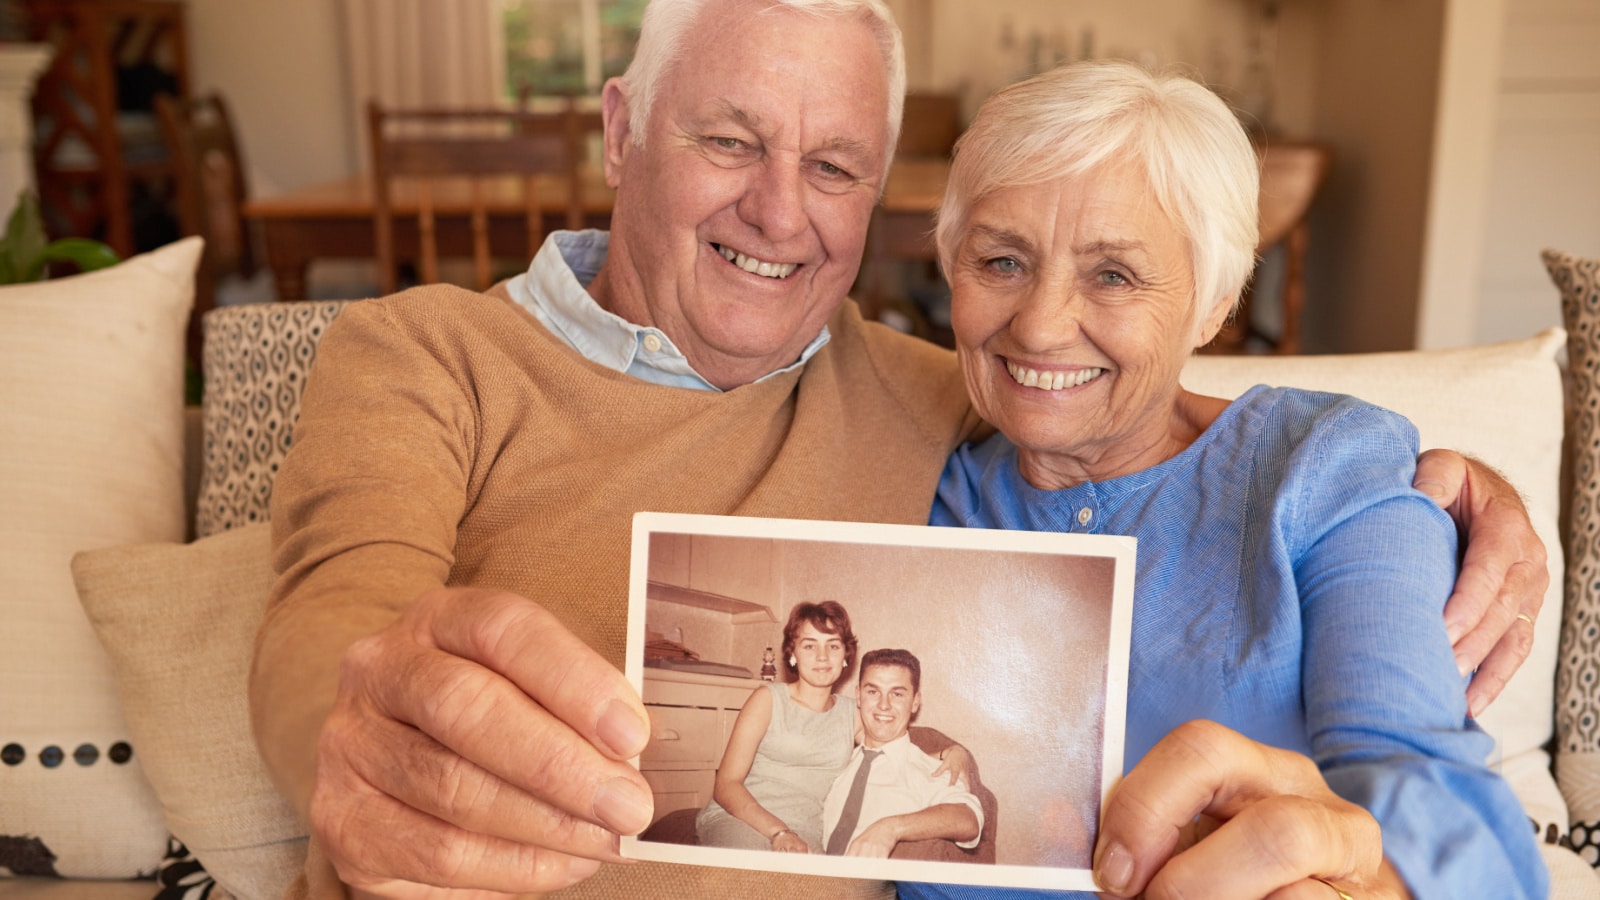 Portrait of a smiling senior couple holding up an old photograph of themselves when they were young while sitting on their sofa at home